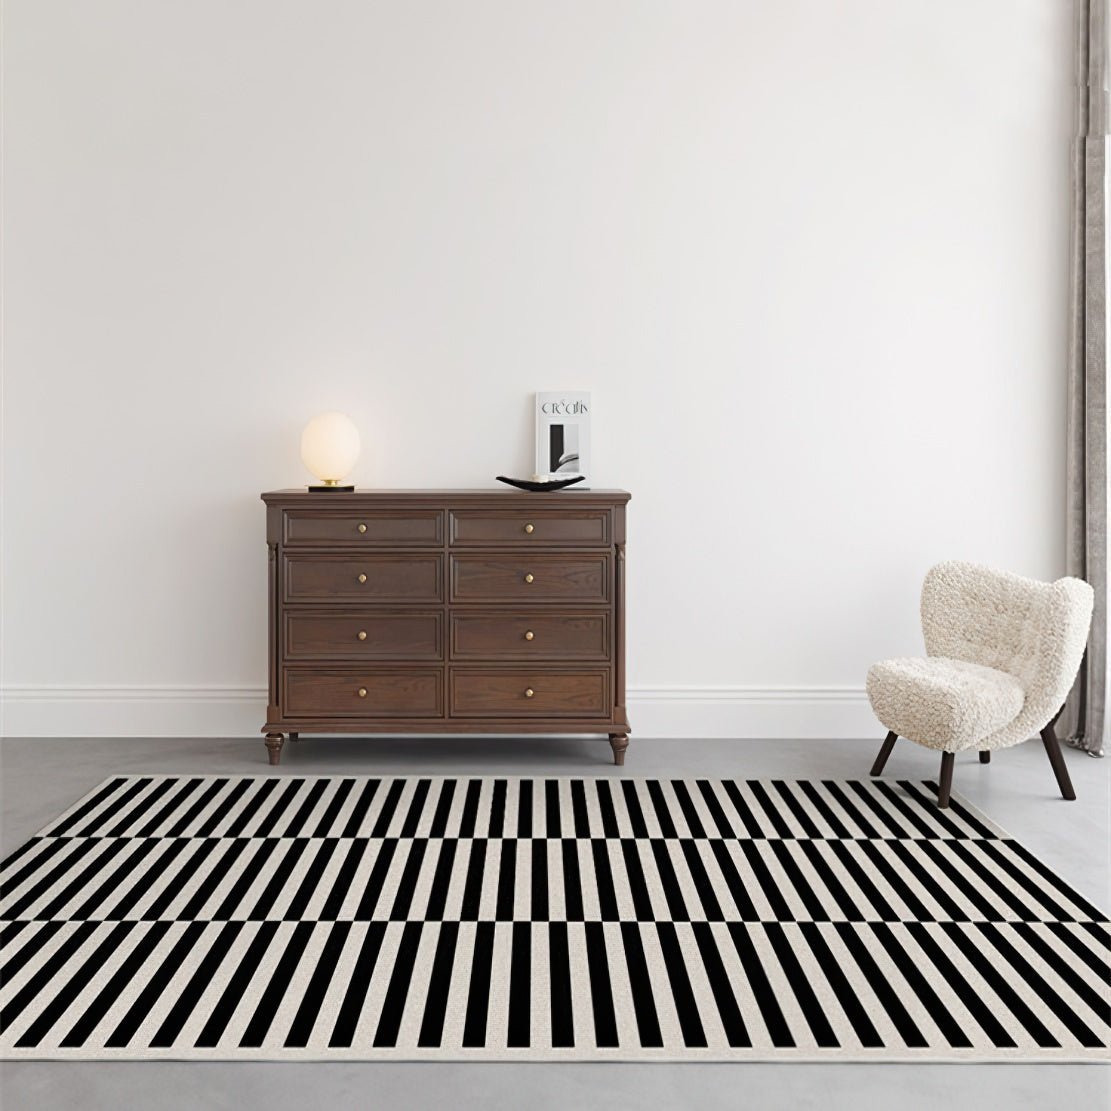 Nordic living room with a black and white striped area floor carpet.